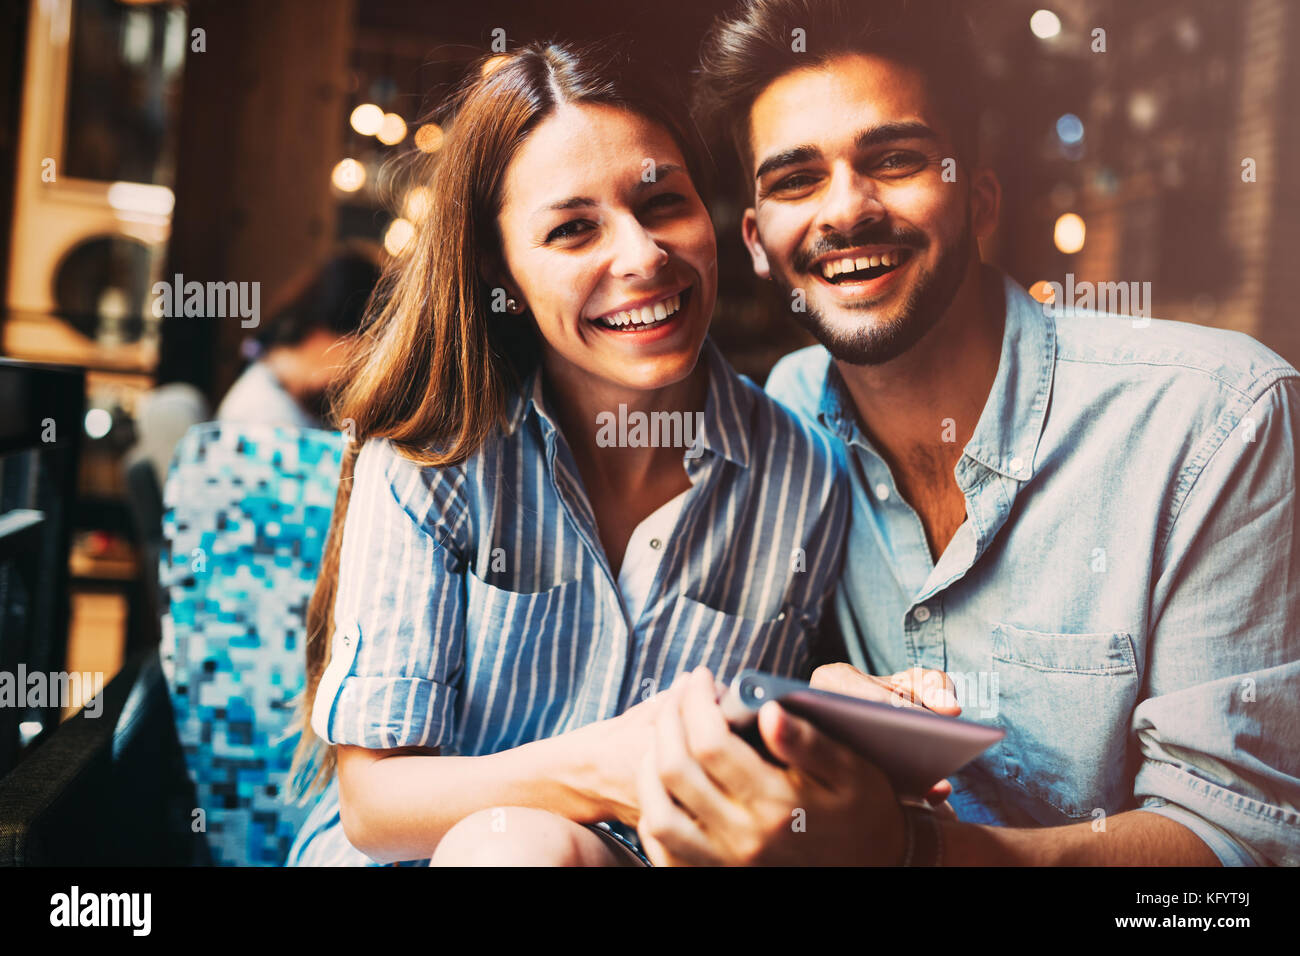 Young attractive couple on date in coffee shop Stock Photo